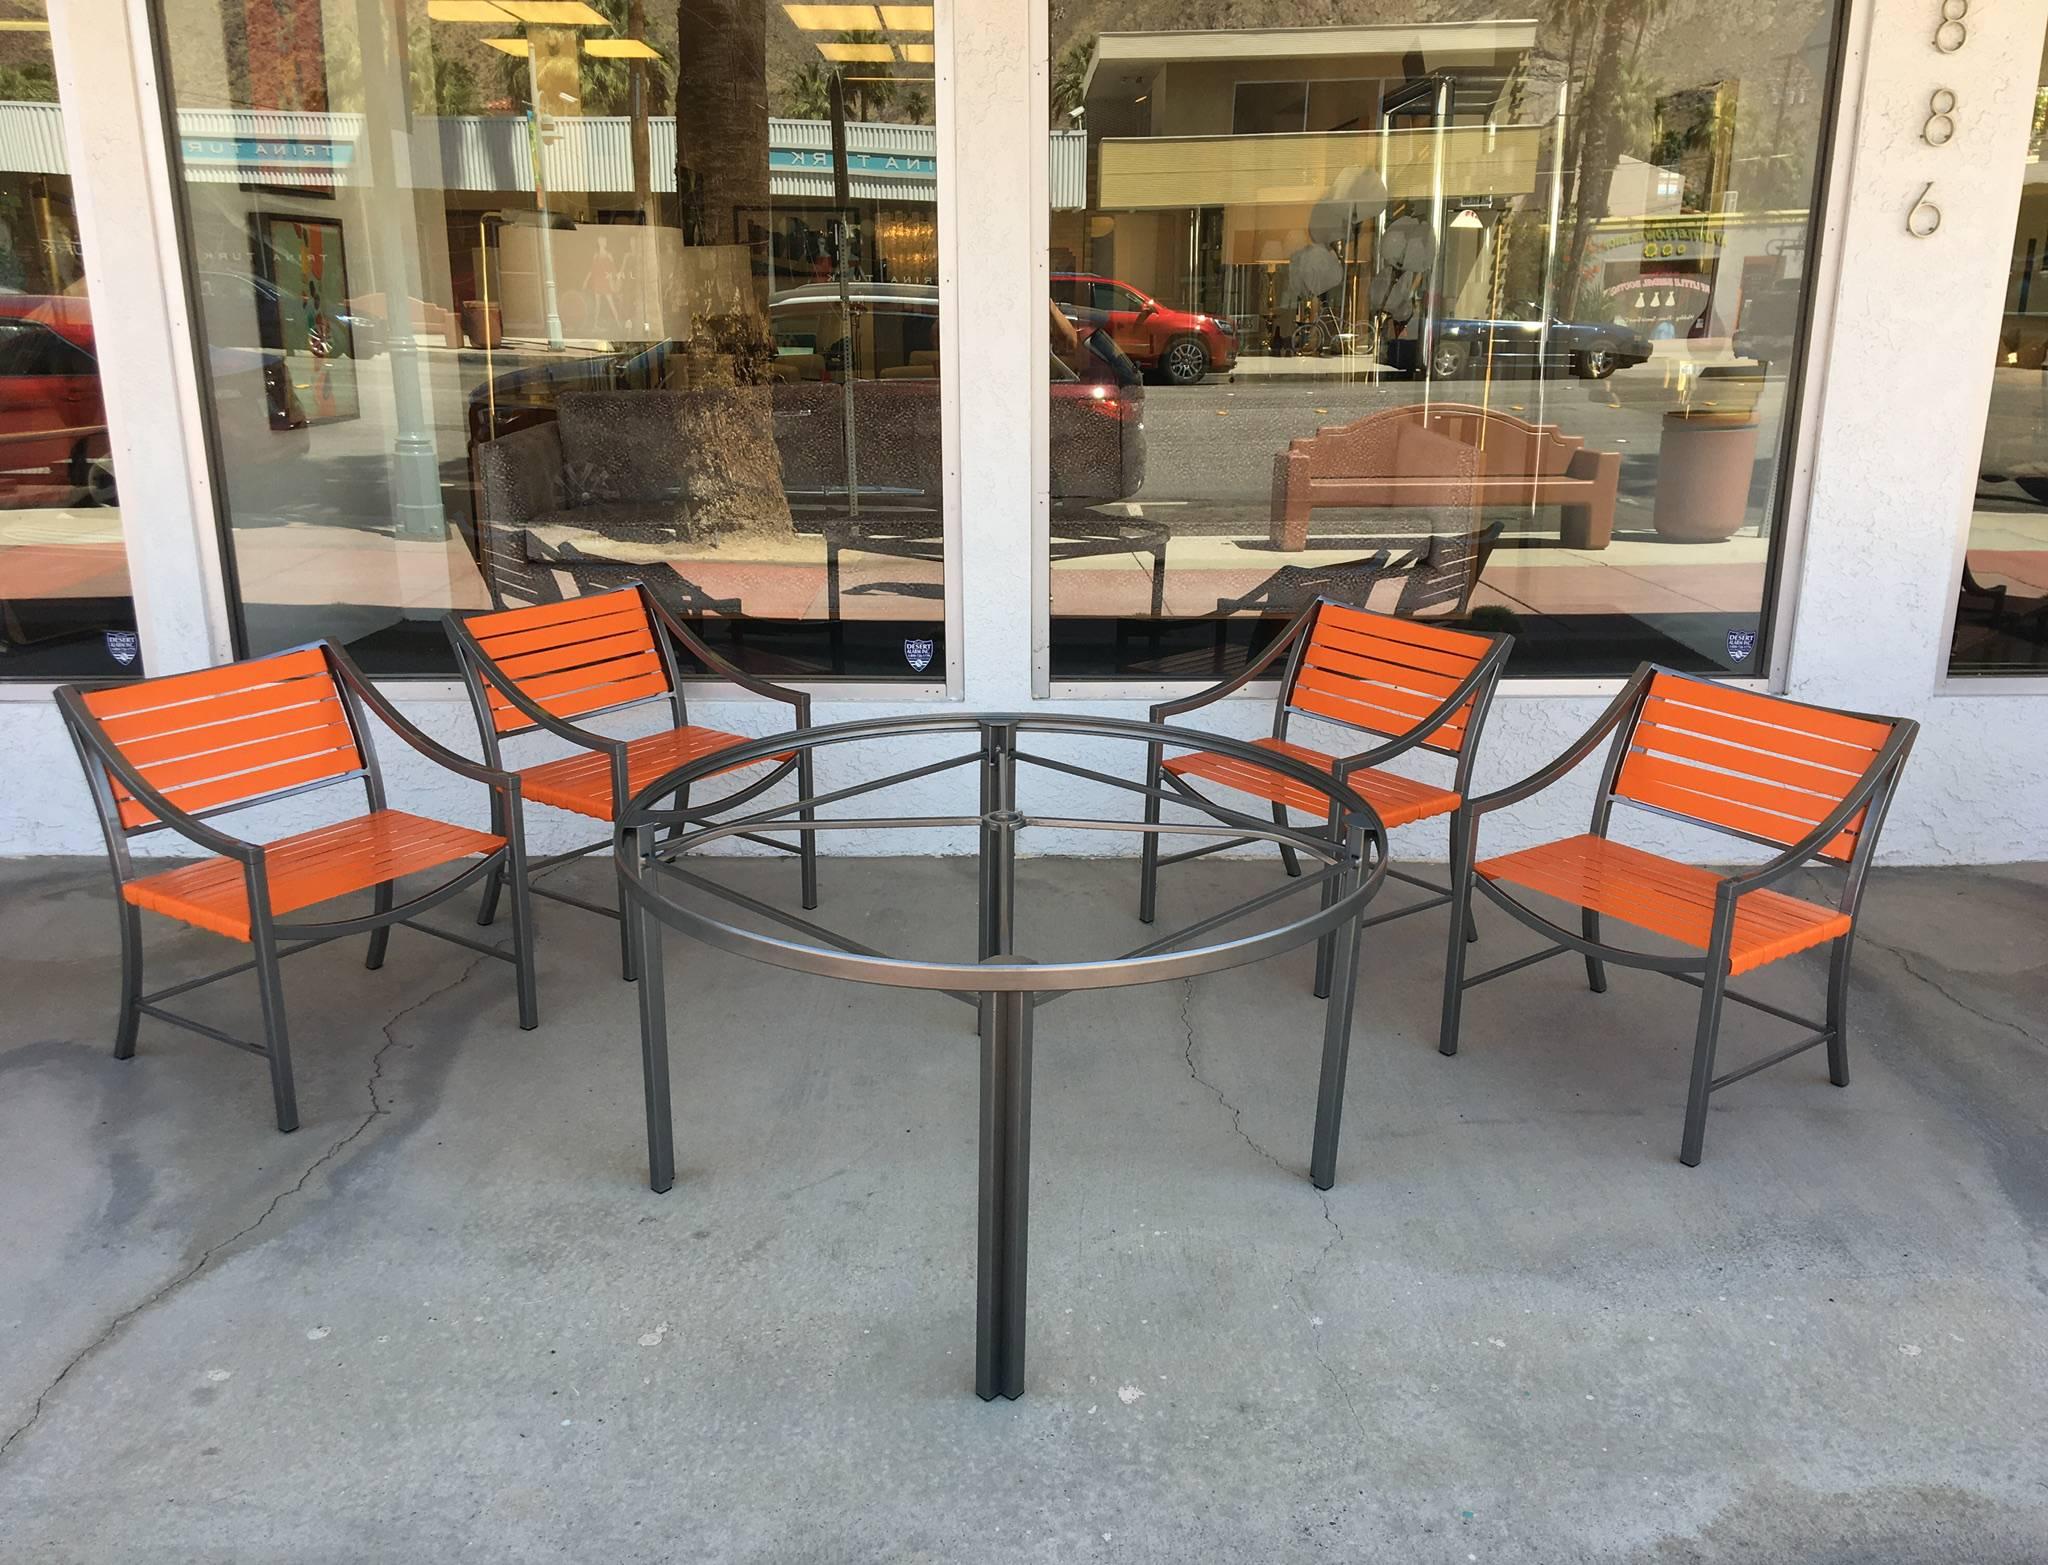 A beautiful 1970s dining set by Brown Jordan.
All newly professionally restored in a charcoal grey and tangerine orange strapping. 

Dimensions: 
Chair: 28.75 high, 22.25 wide, 22" deep, 15.25 seat. 
Table: 26.25" high, 47.5"